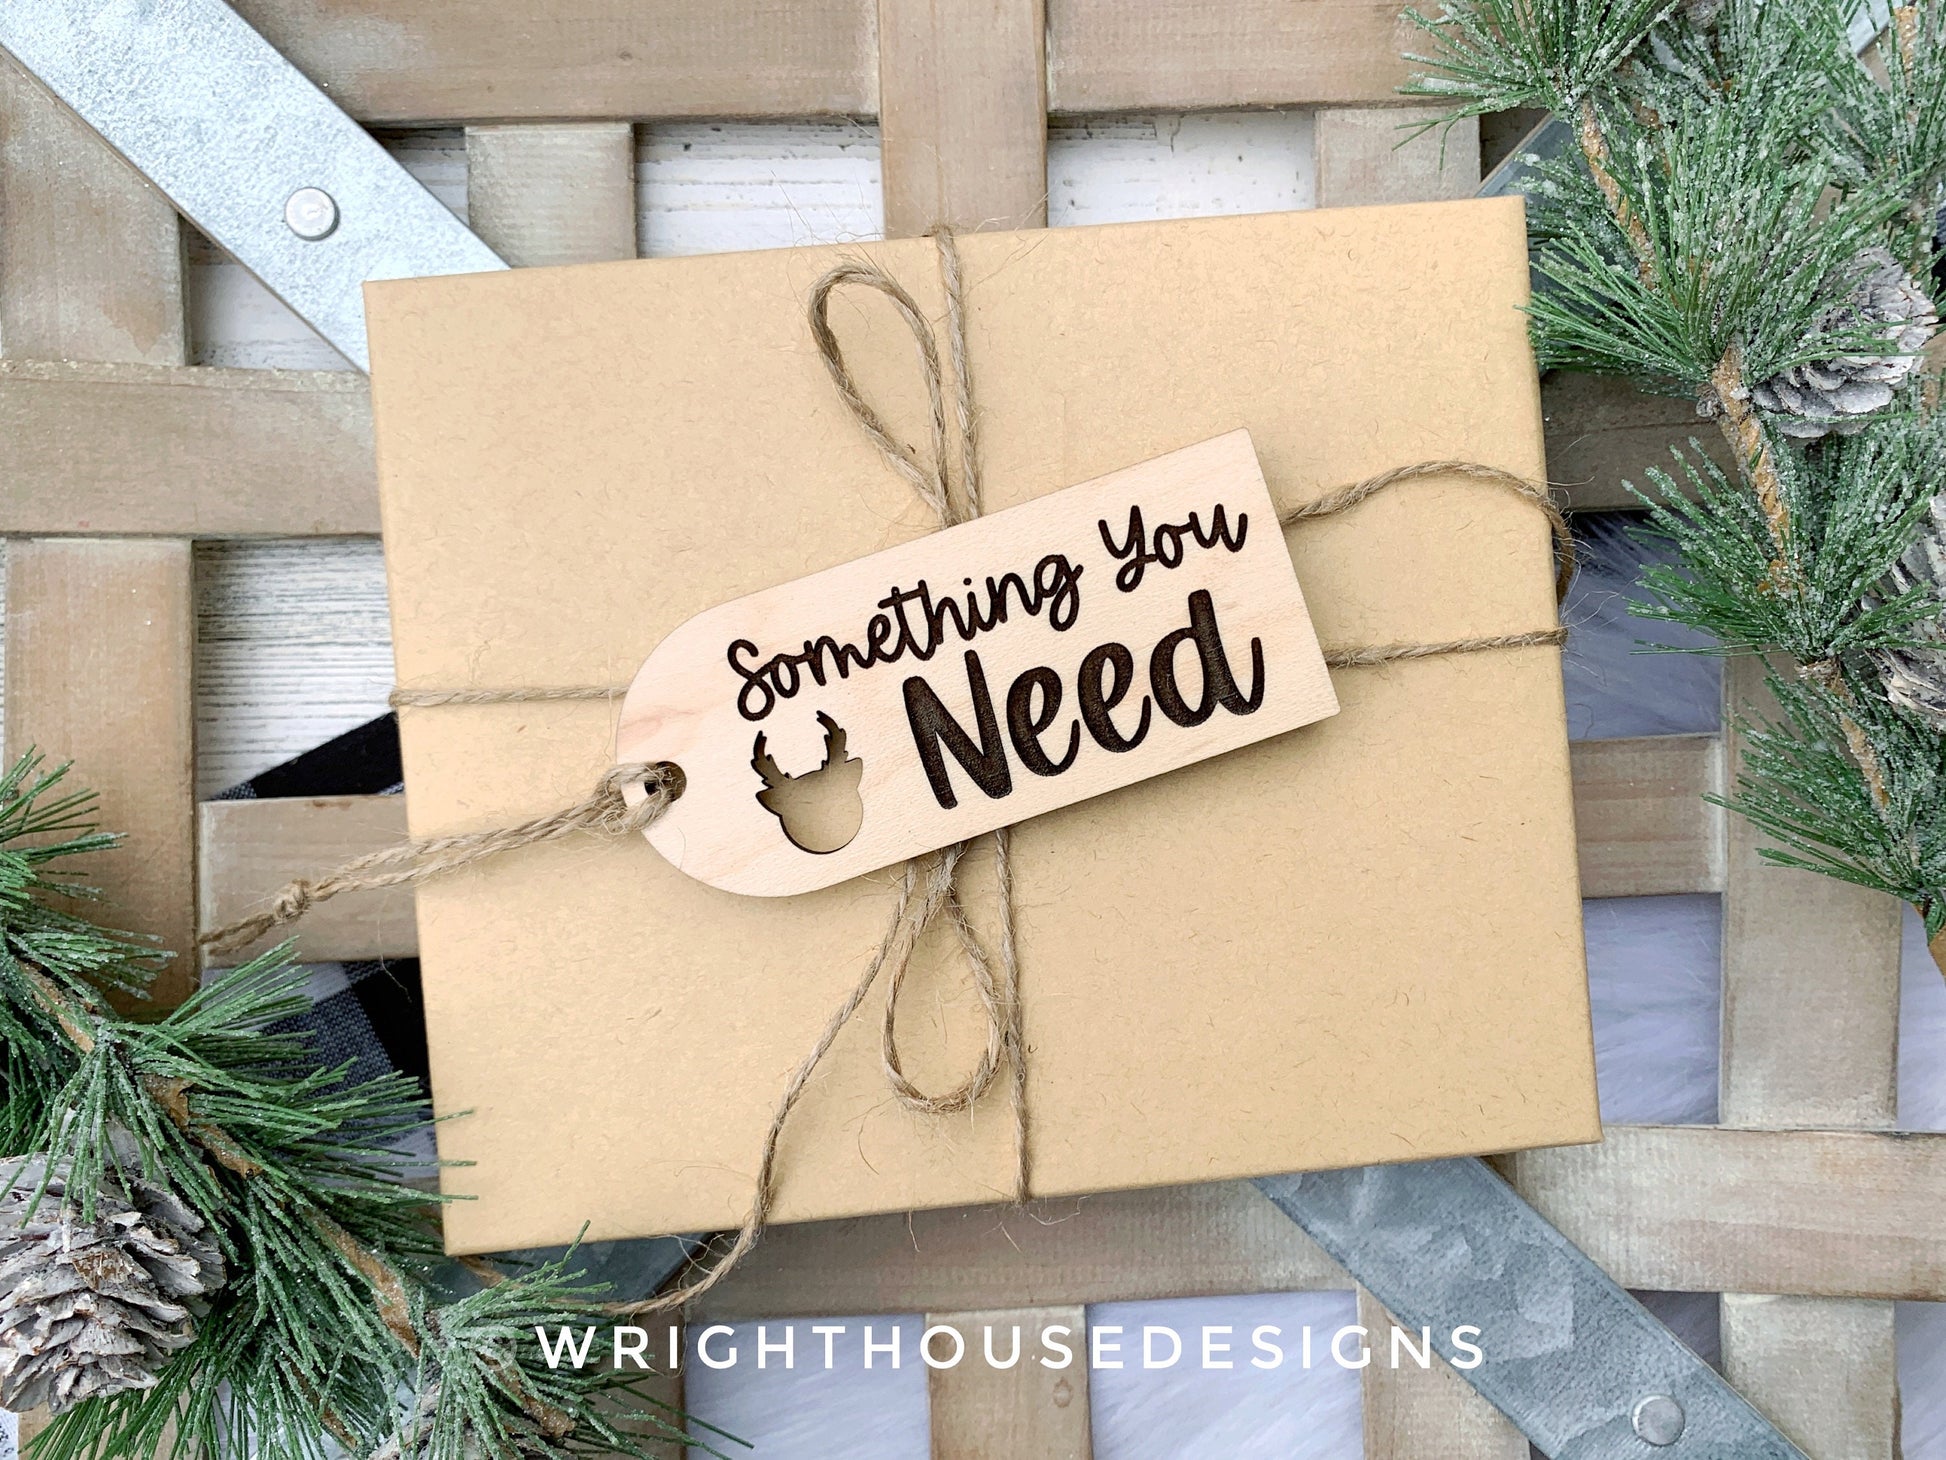 Something You Want Need Wear Read Christmas Gift Tags - Personalizable Generic Engraved Stocking Tag Bundle - Digital SVG File For Glowforge